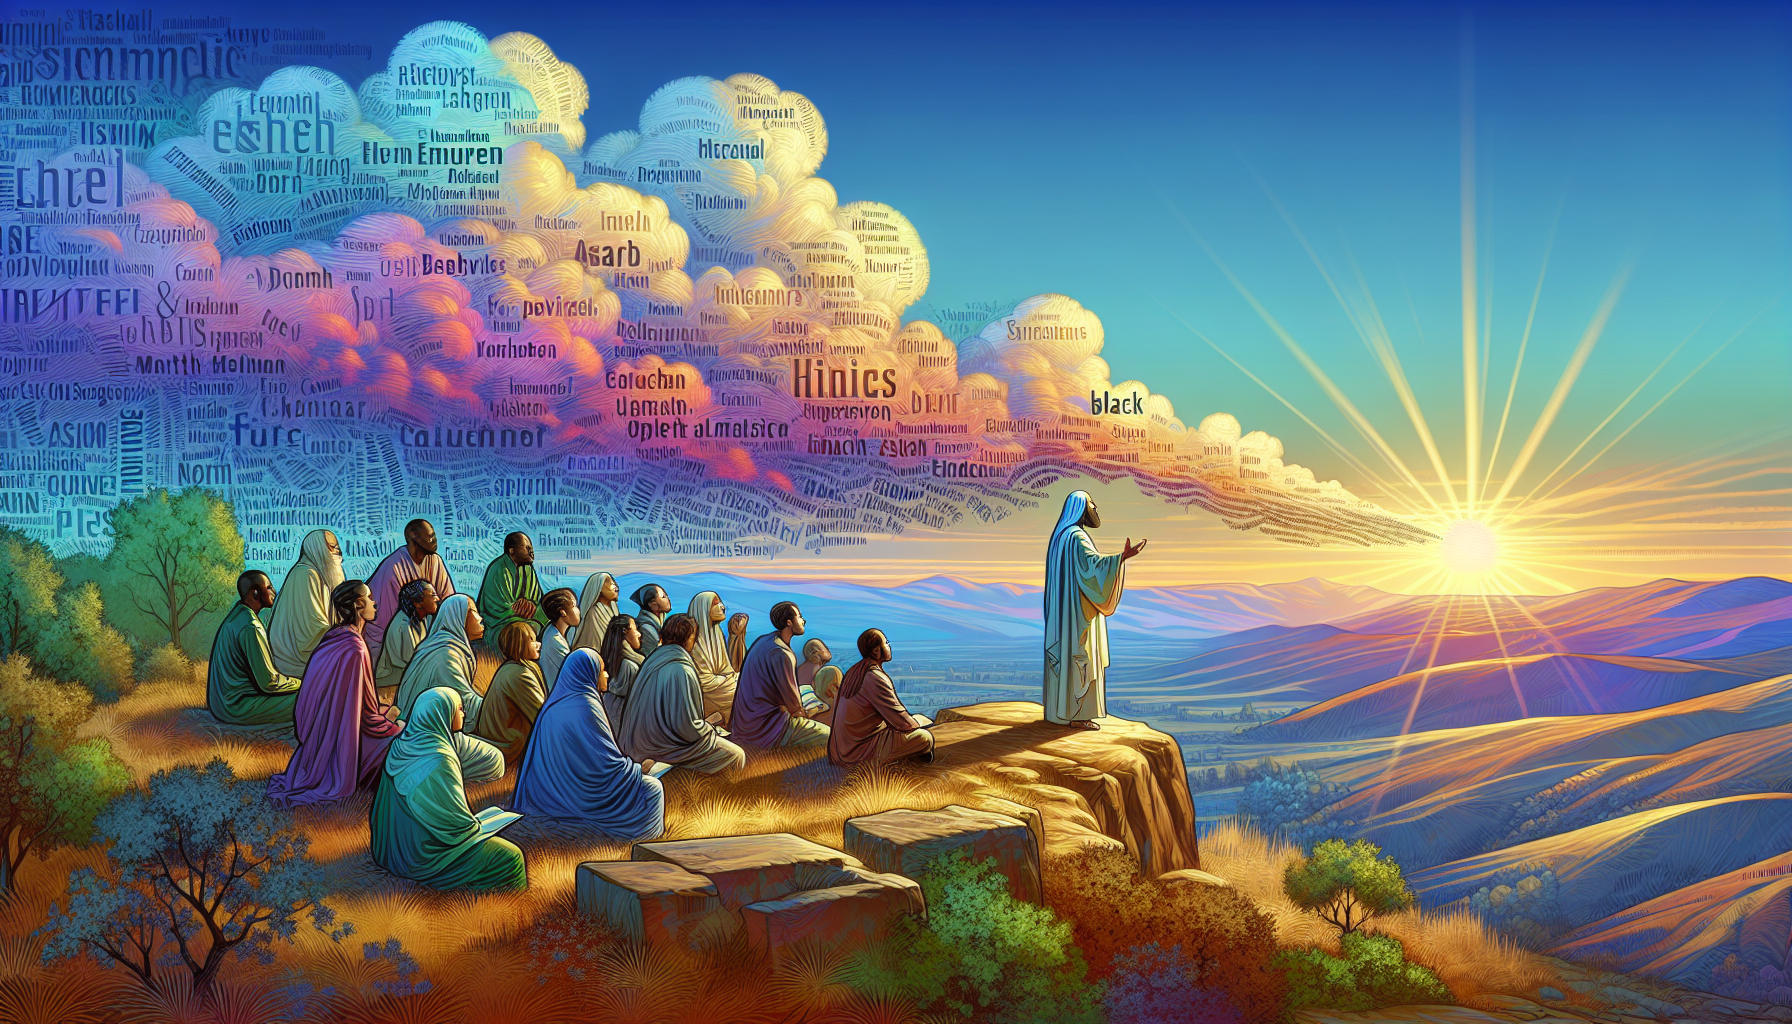 Serene landscape depicting Jesus on a hill during sunset, delivering a peaceful sermon to a diverse, attentive crowd, with words of his famous quotes artistically integrated into the clouds above.